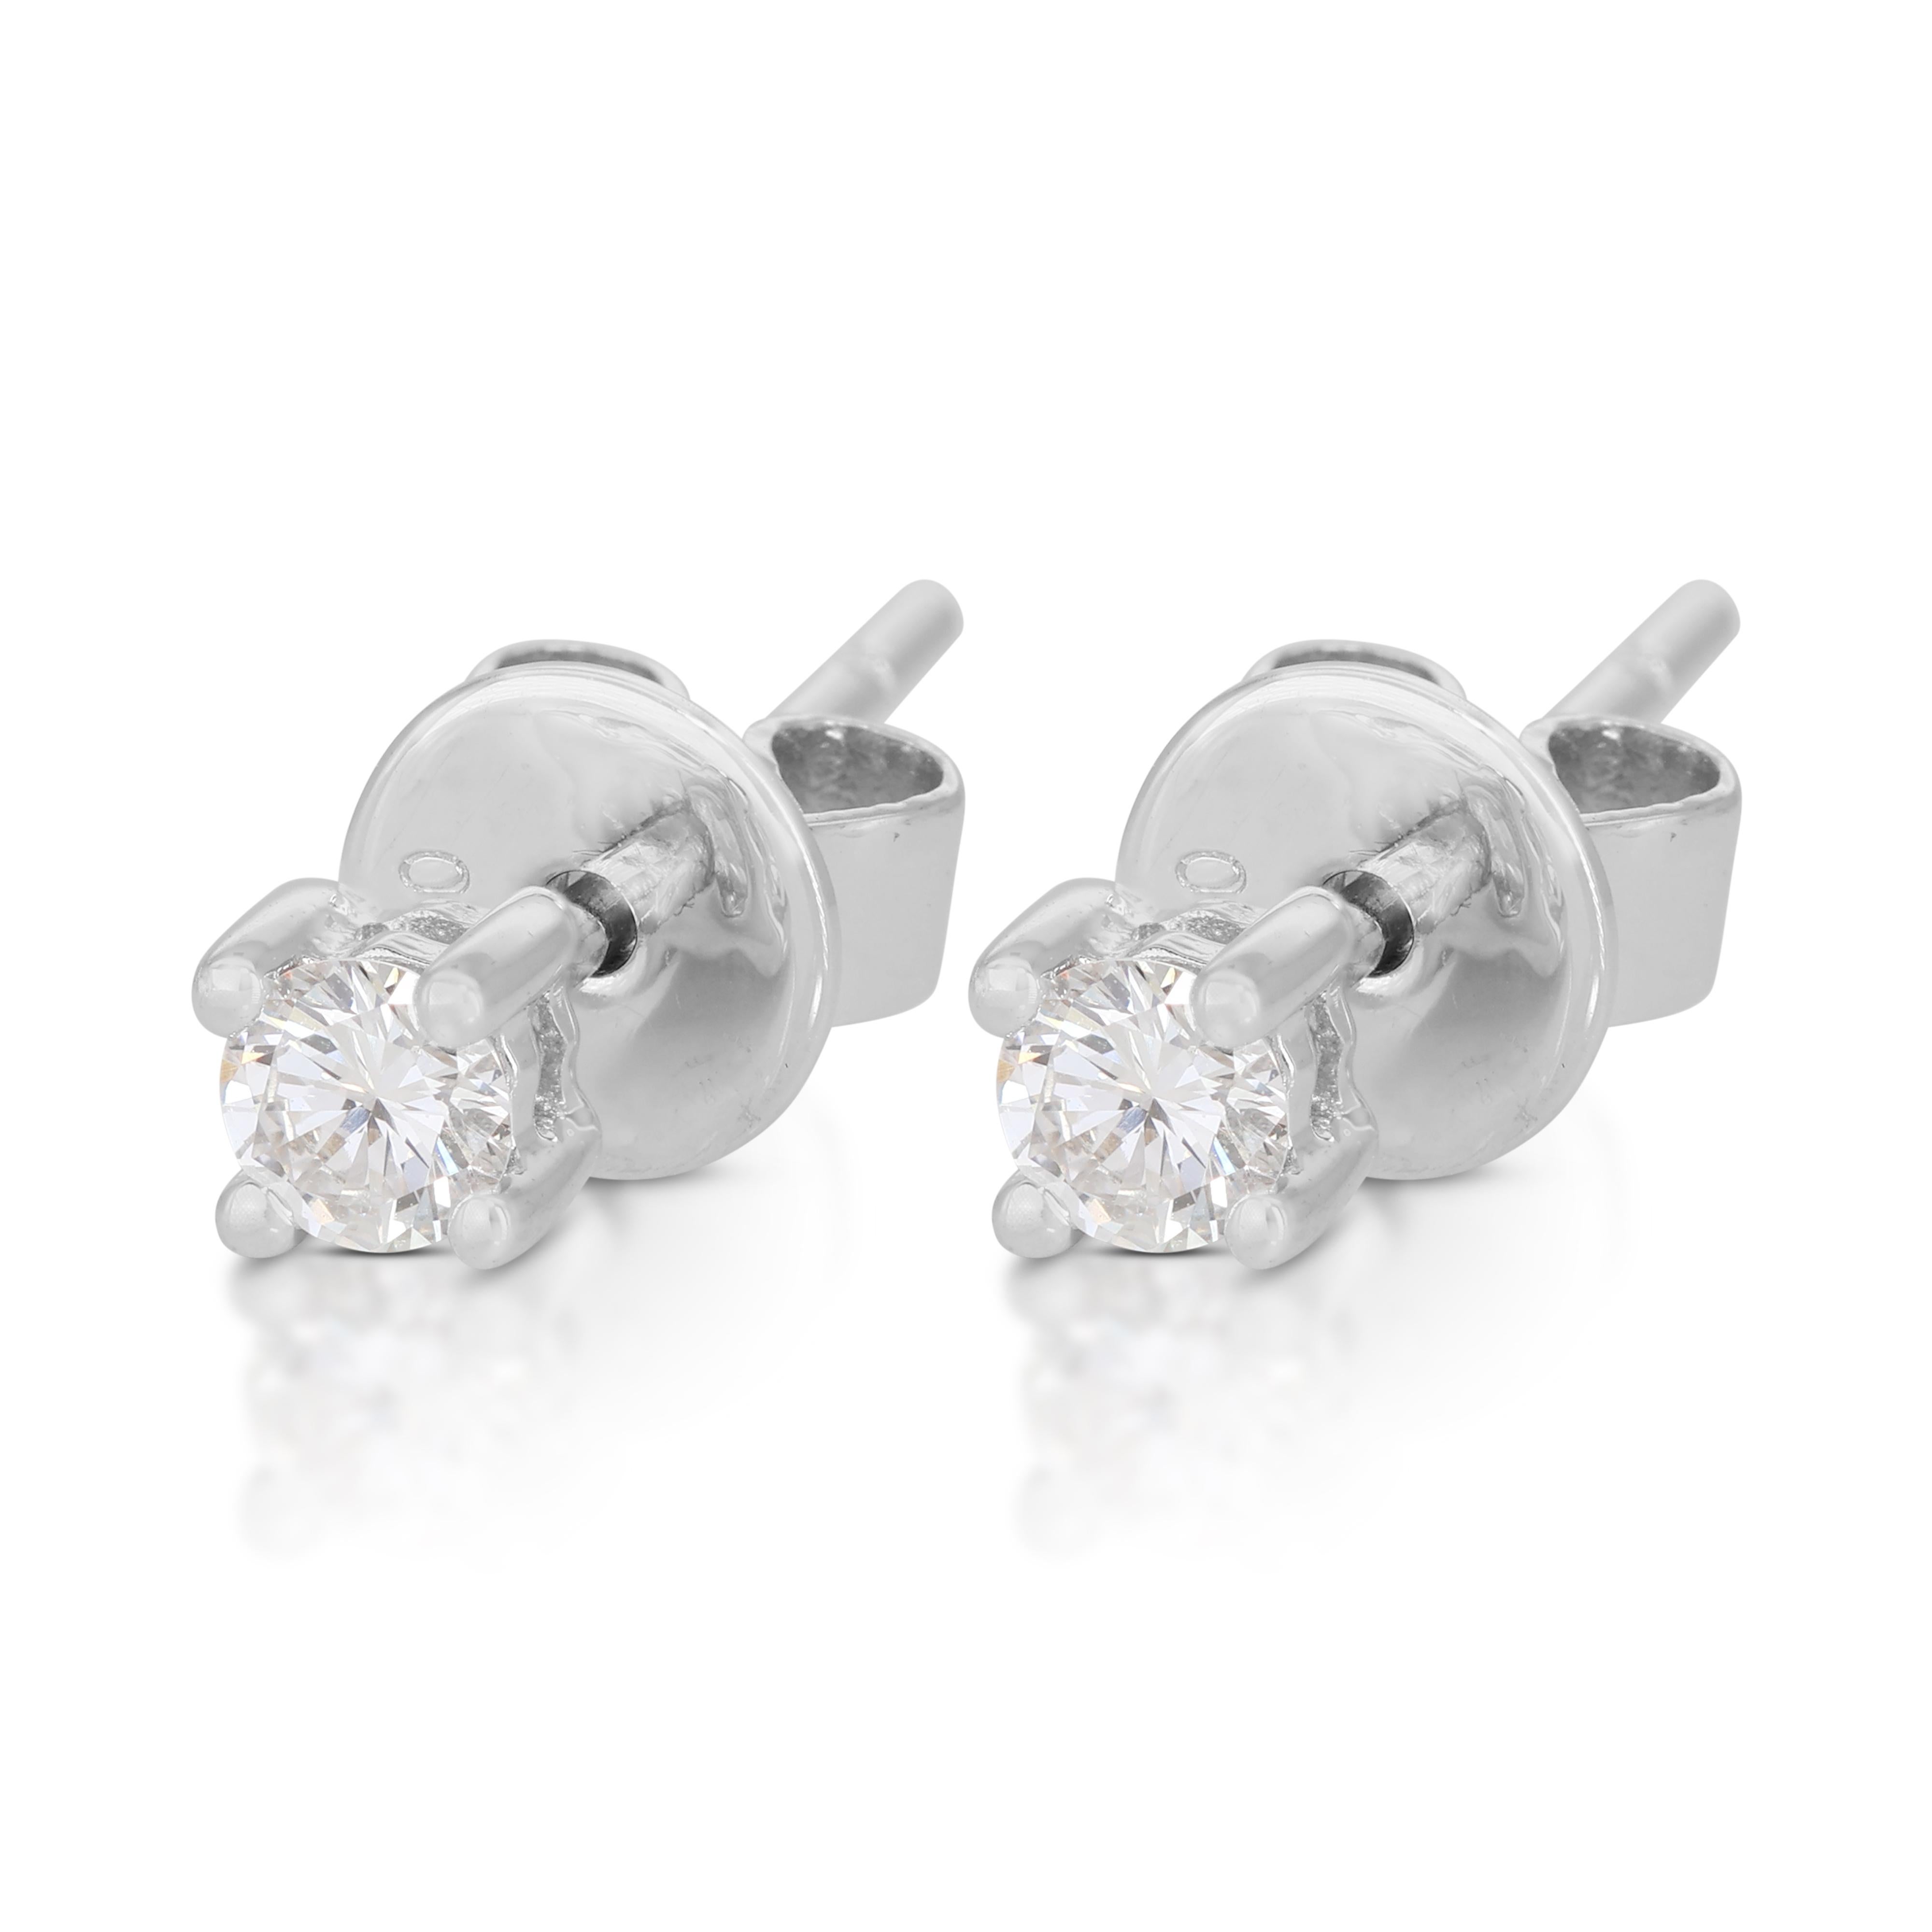 Elegant 0.12ct Diamonds Stud Earrings in18K White Gold In Excellent Condition For Sale In רמת גן, IL